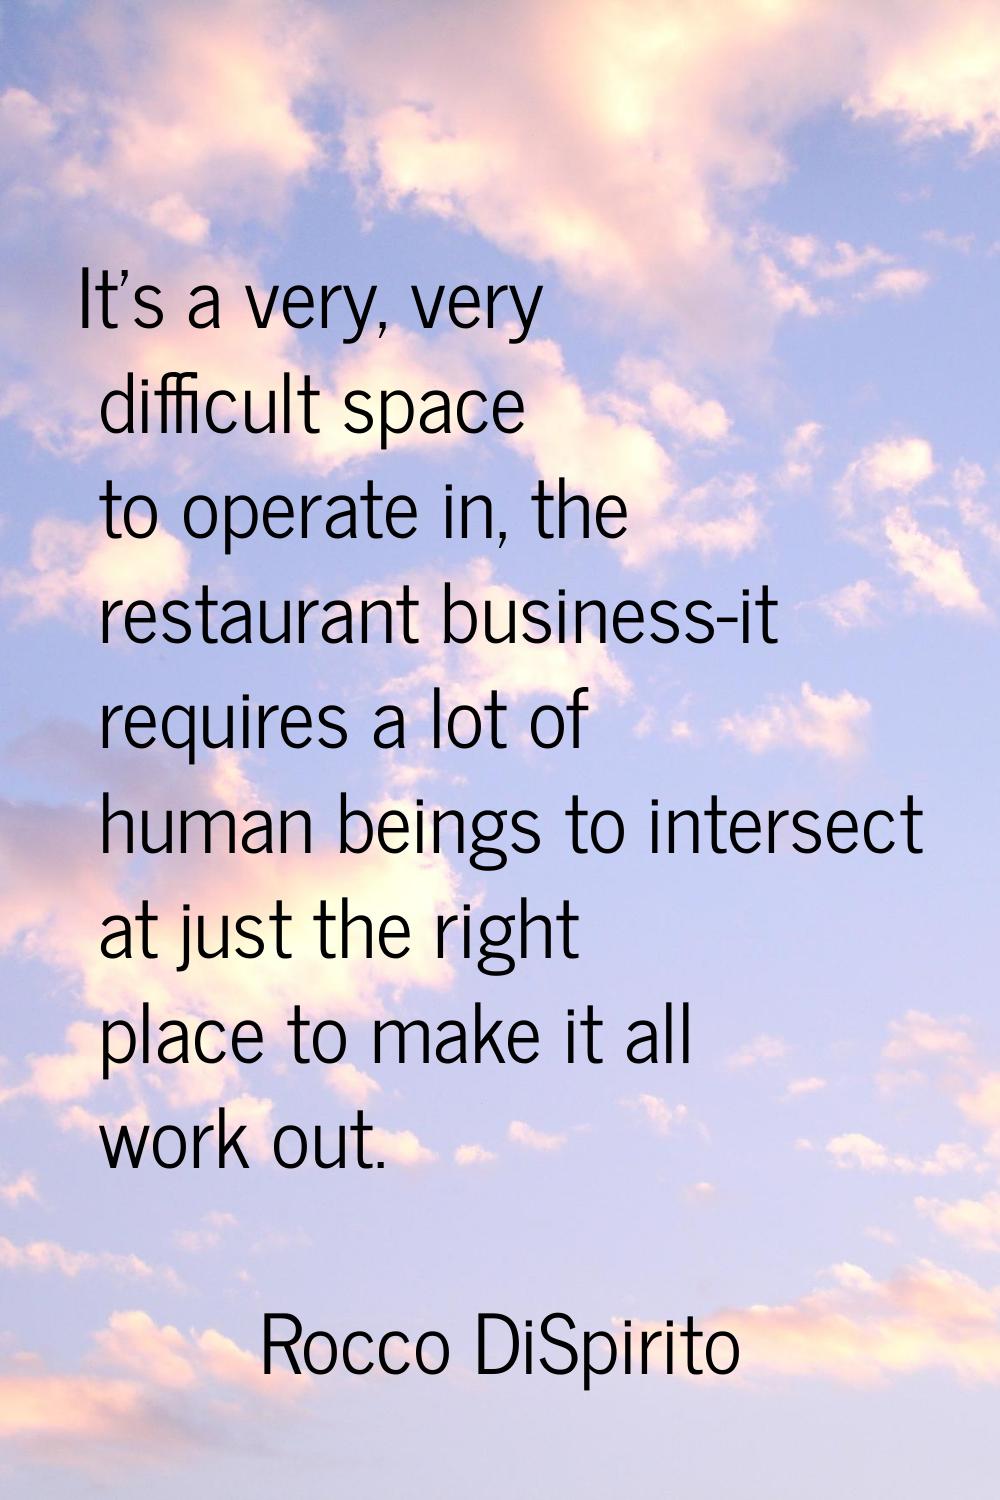 It's a very, very difficult space to operate in, the restaurant business-it requires a lot of human